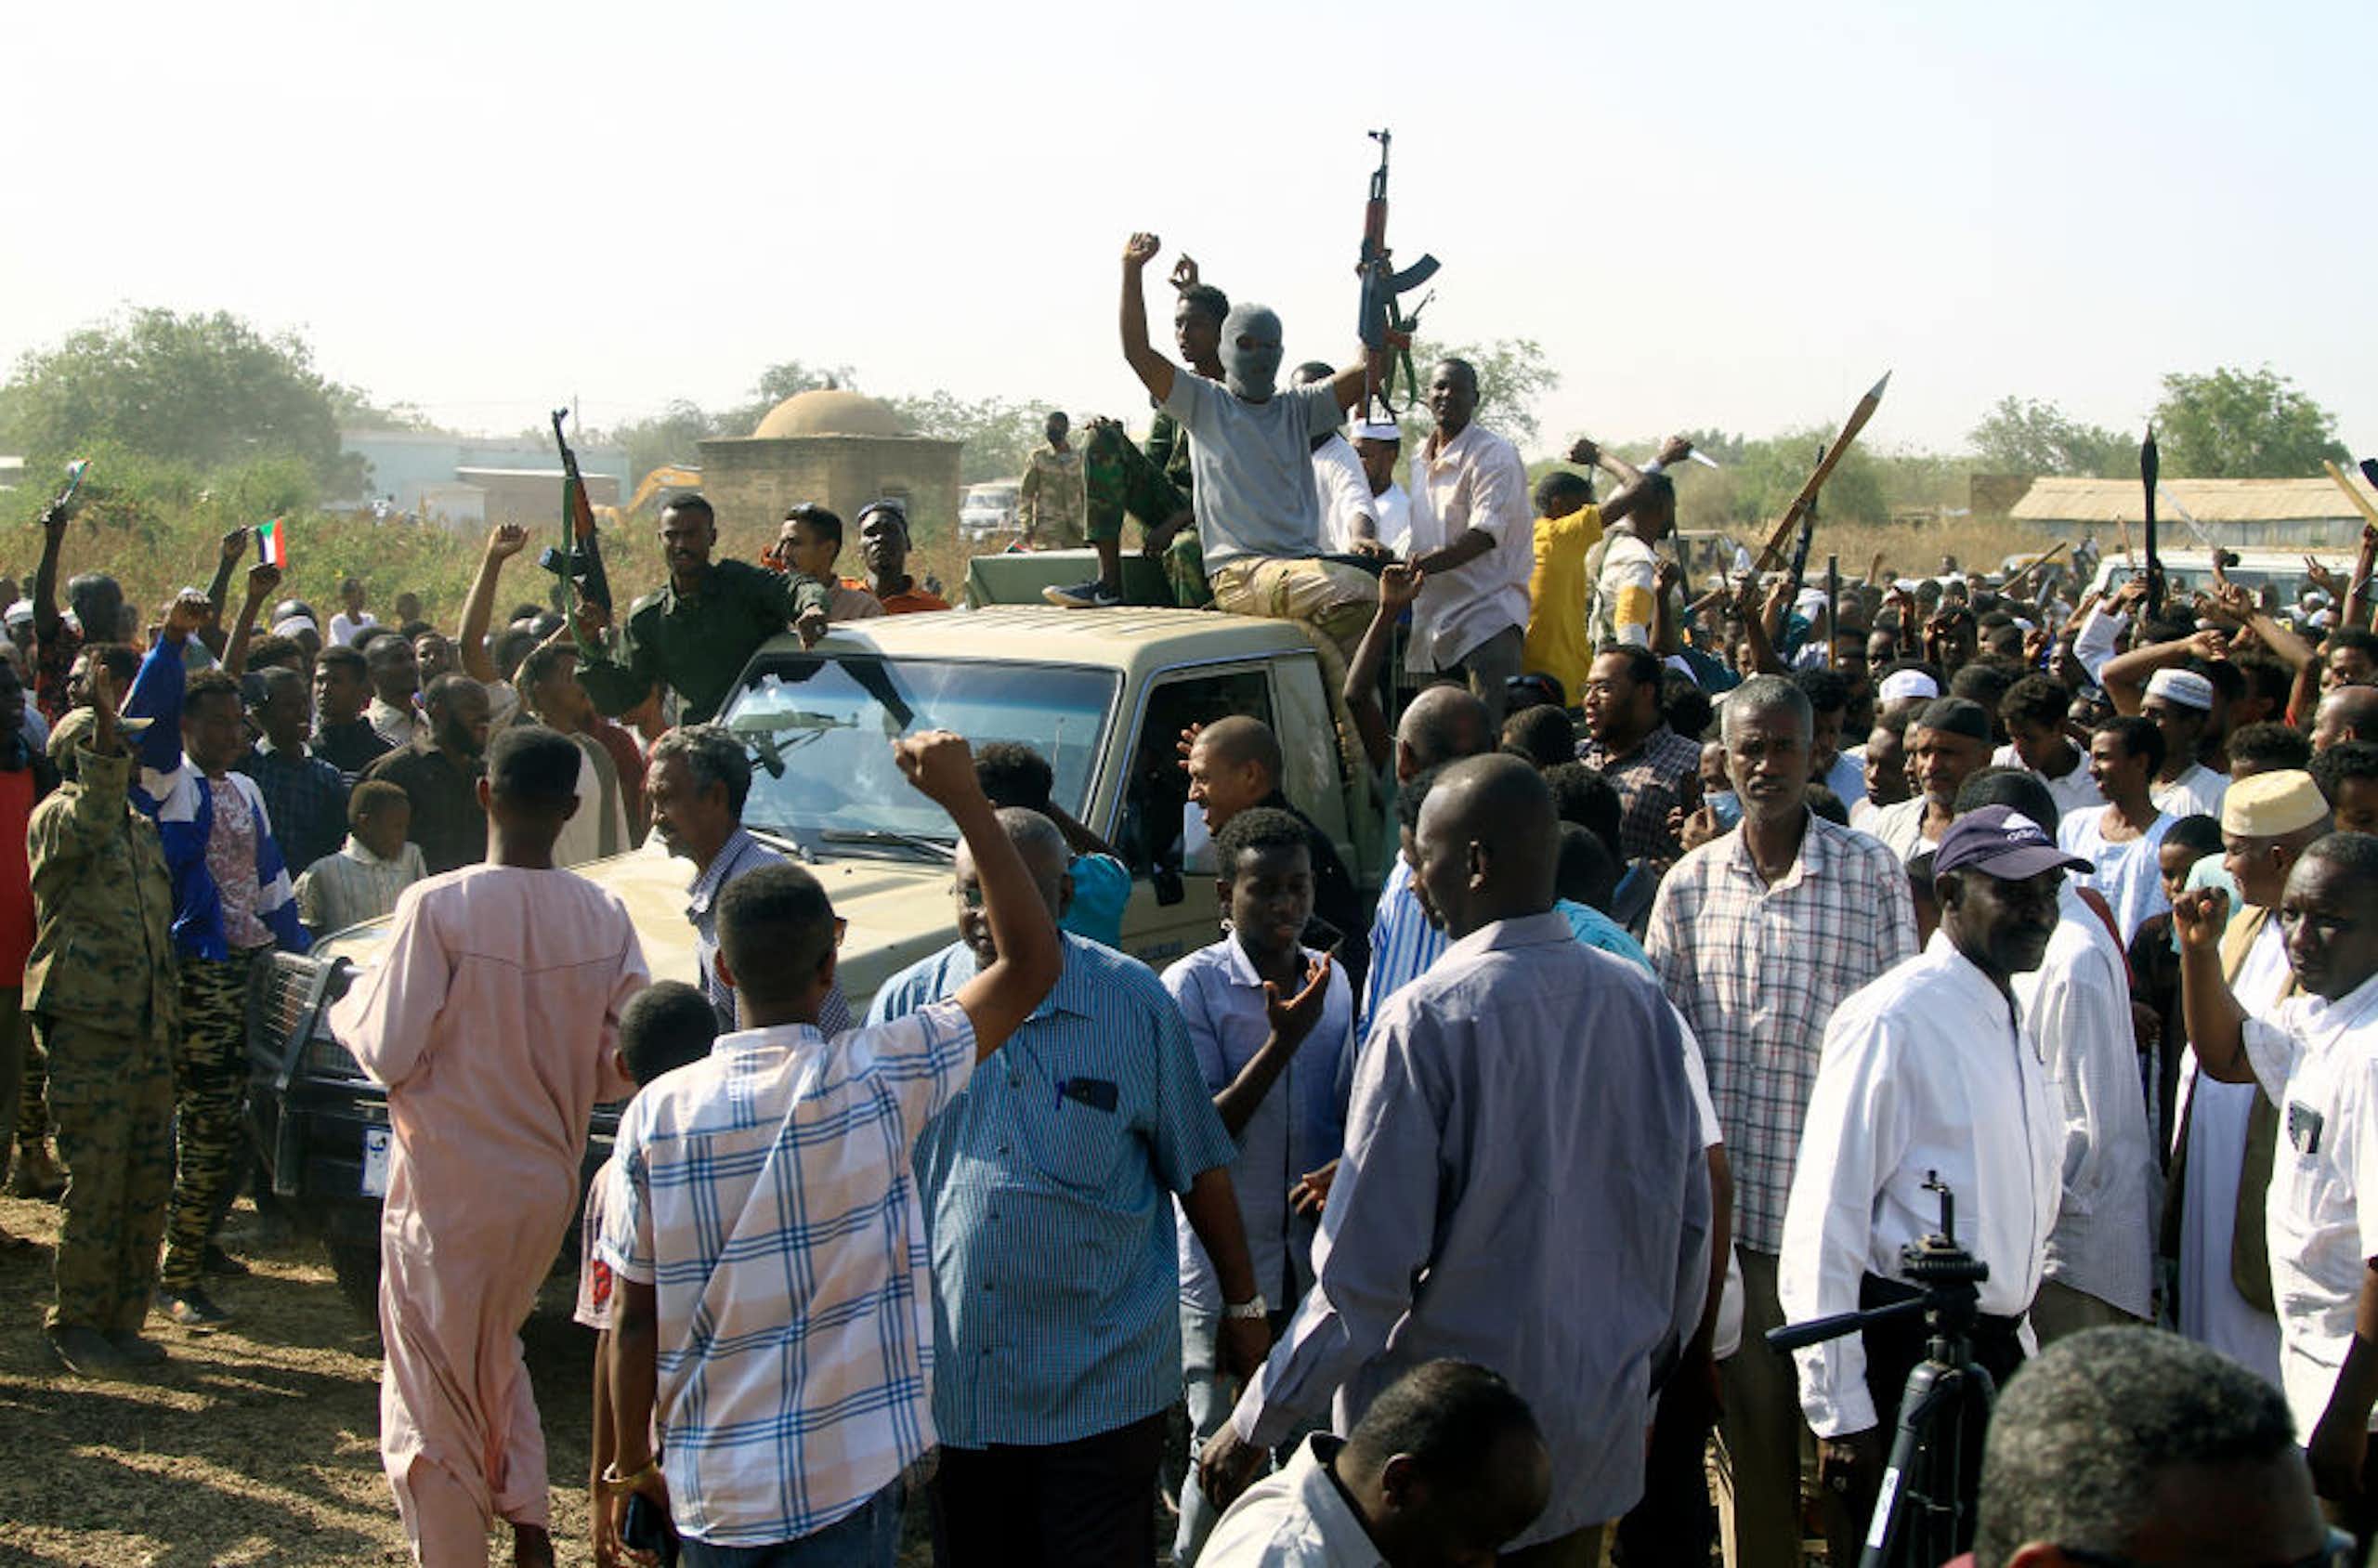 Sudan’s civil war is rooted in its historical favouritism of Arab and Islamic identity